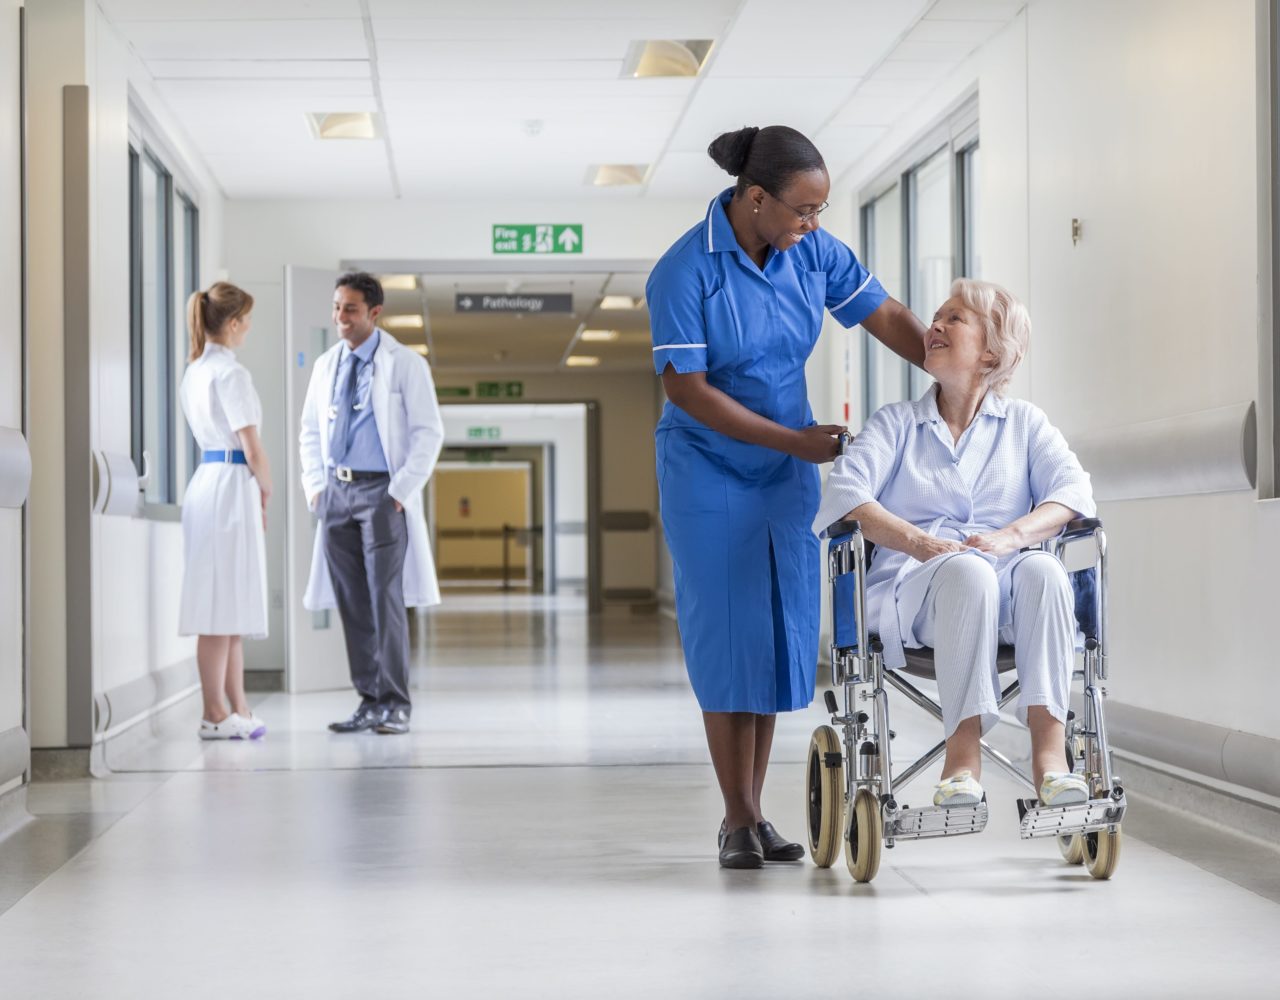 A female nurse with a patient on a wheel chair while two health professionals are in a conversation